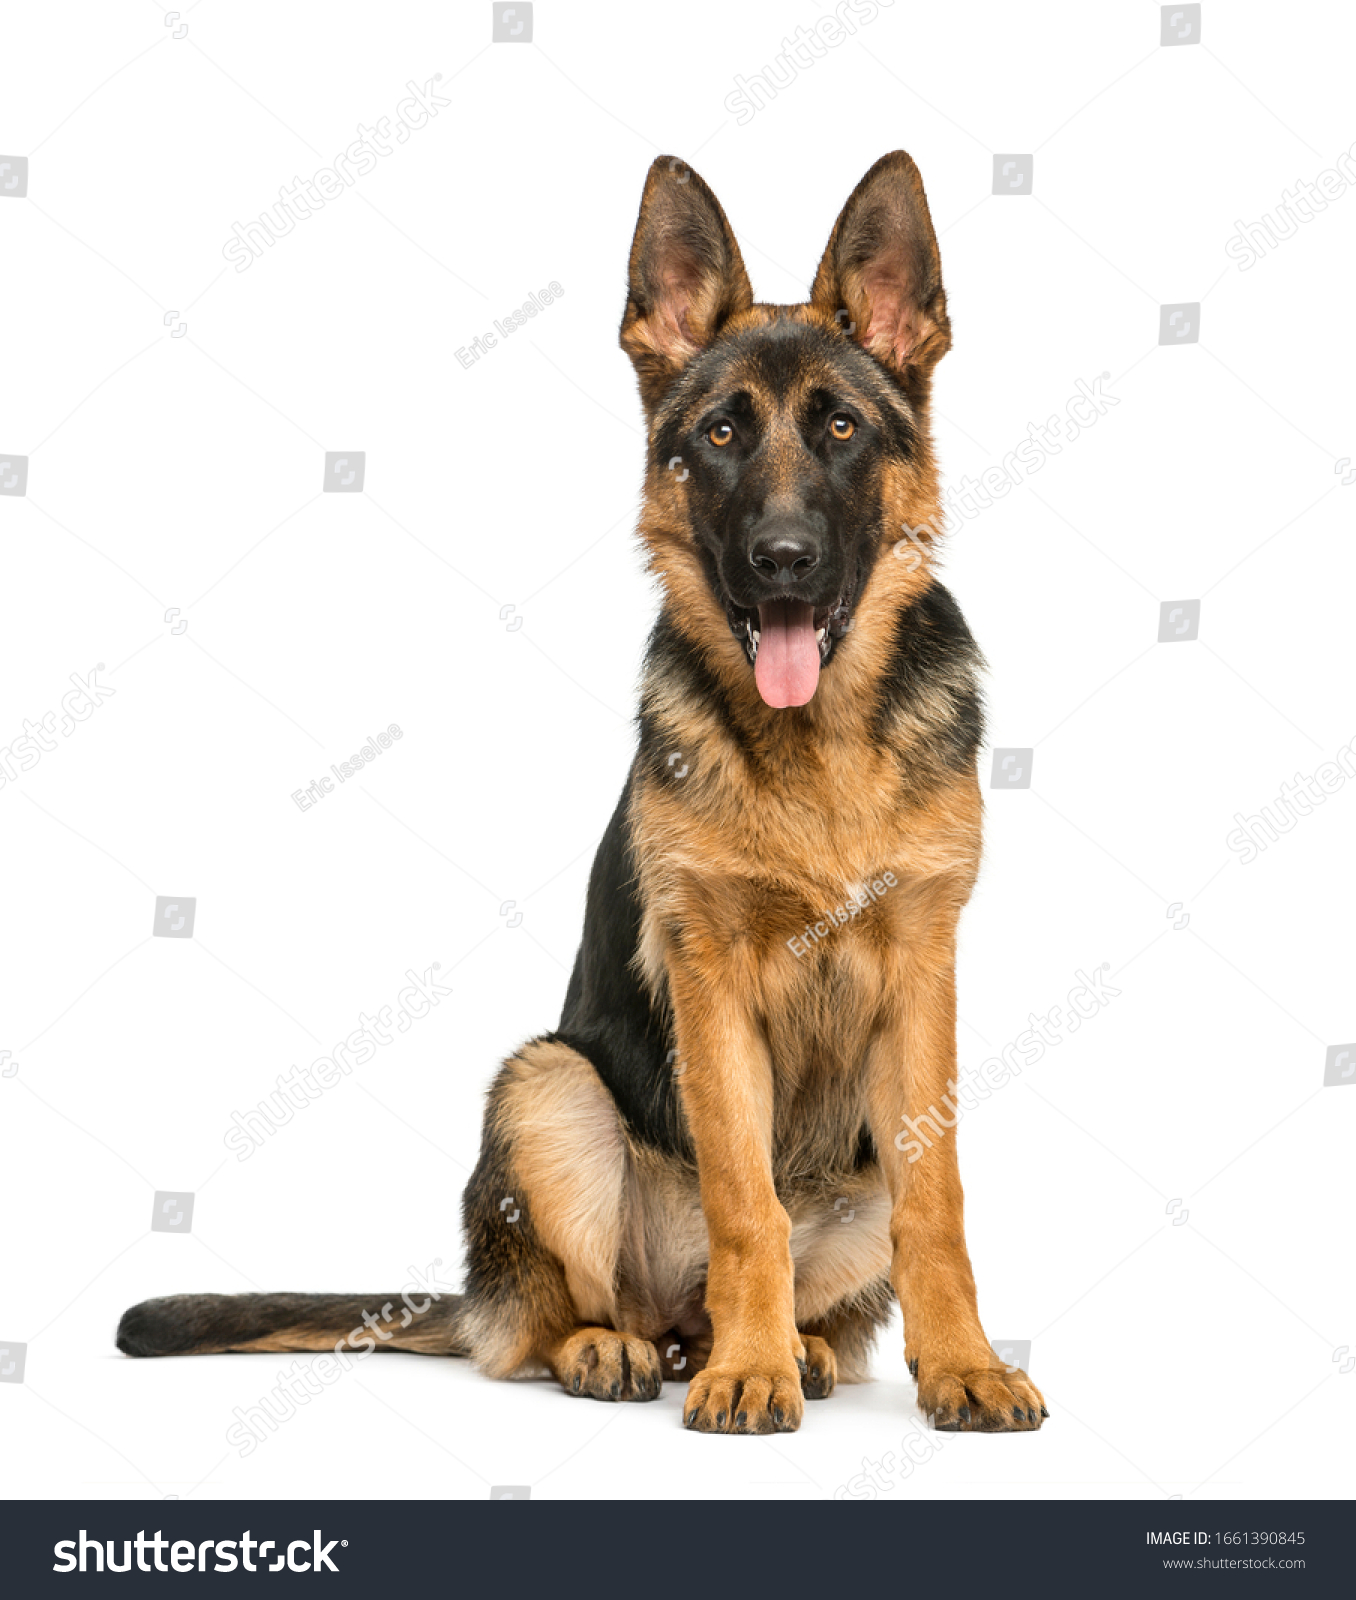 German shepherd sitting and panting, isolated on white #1661390845